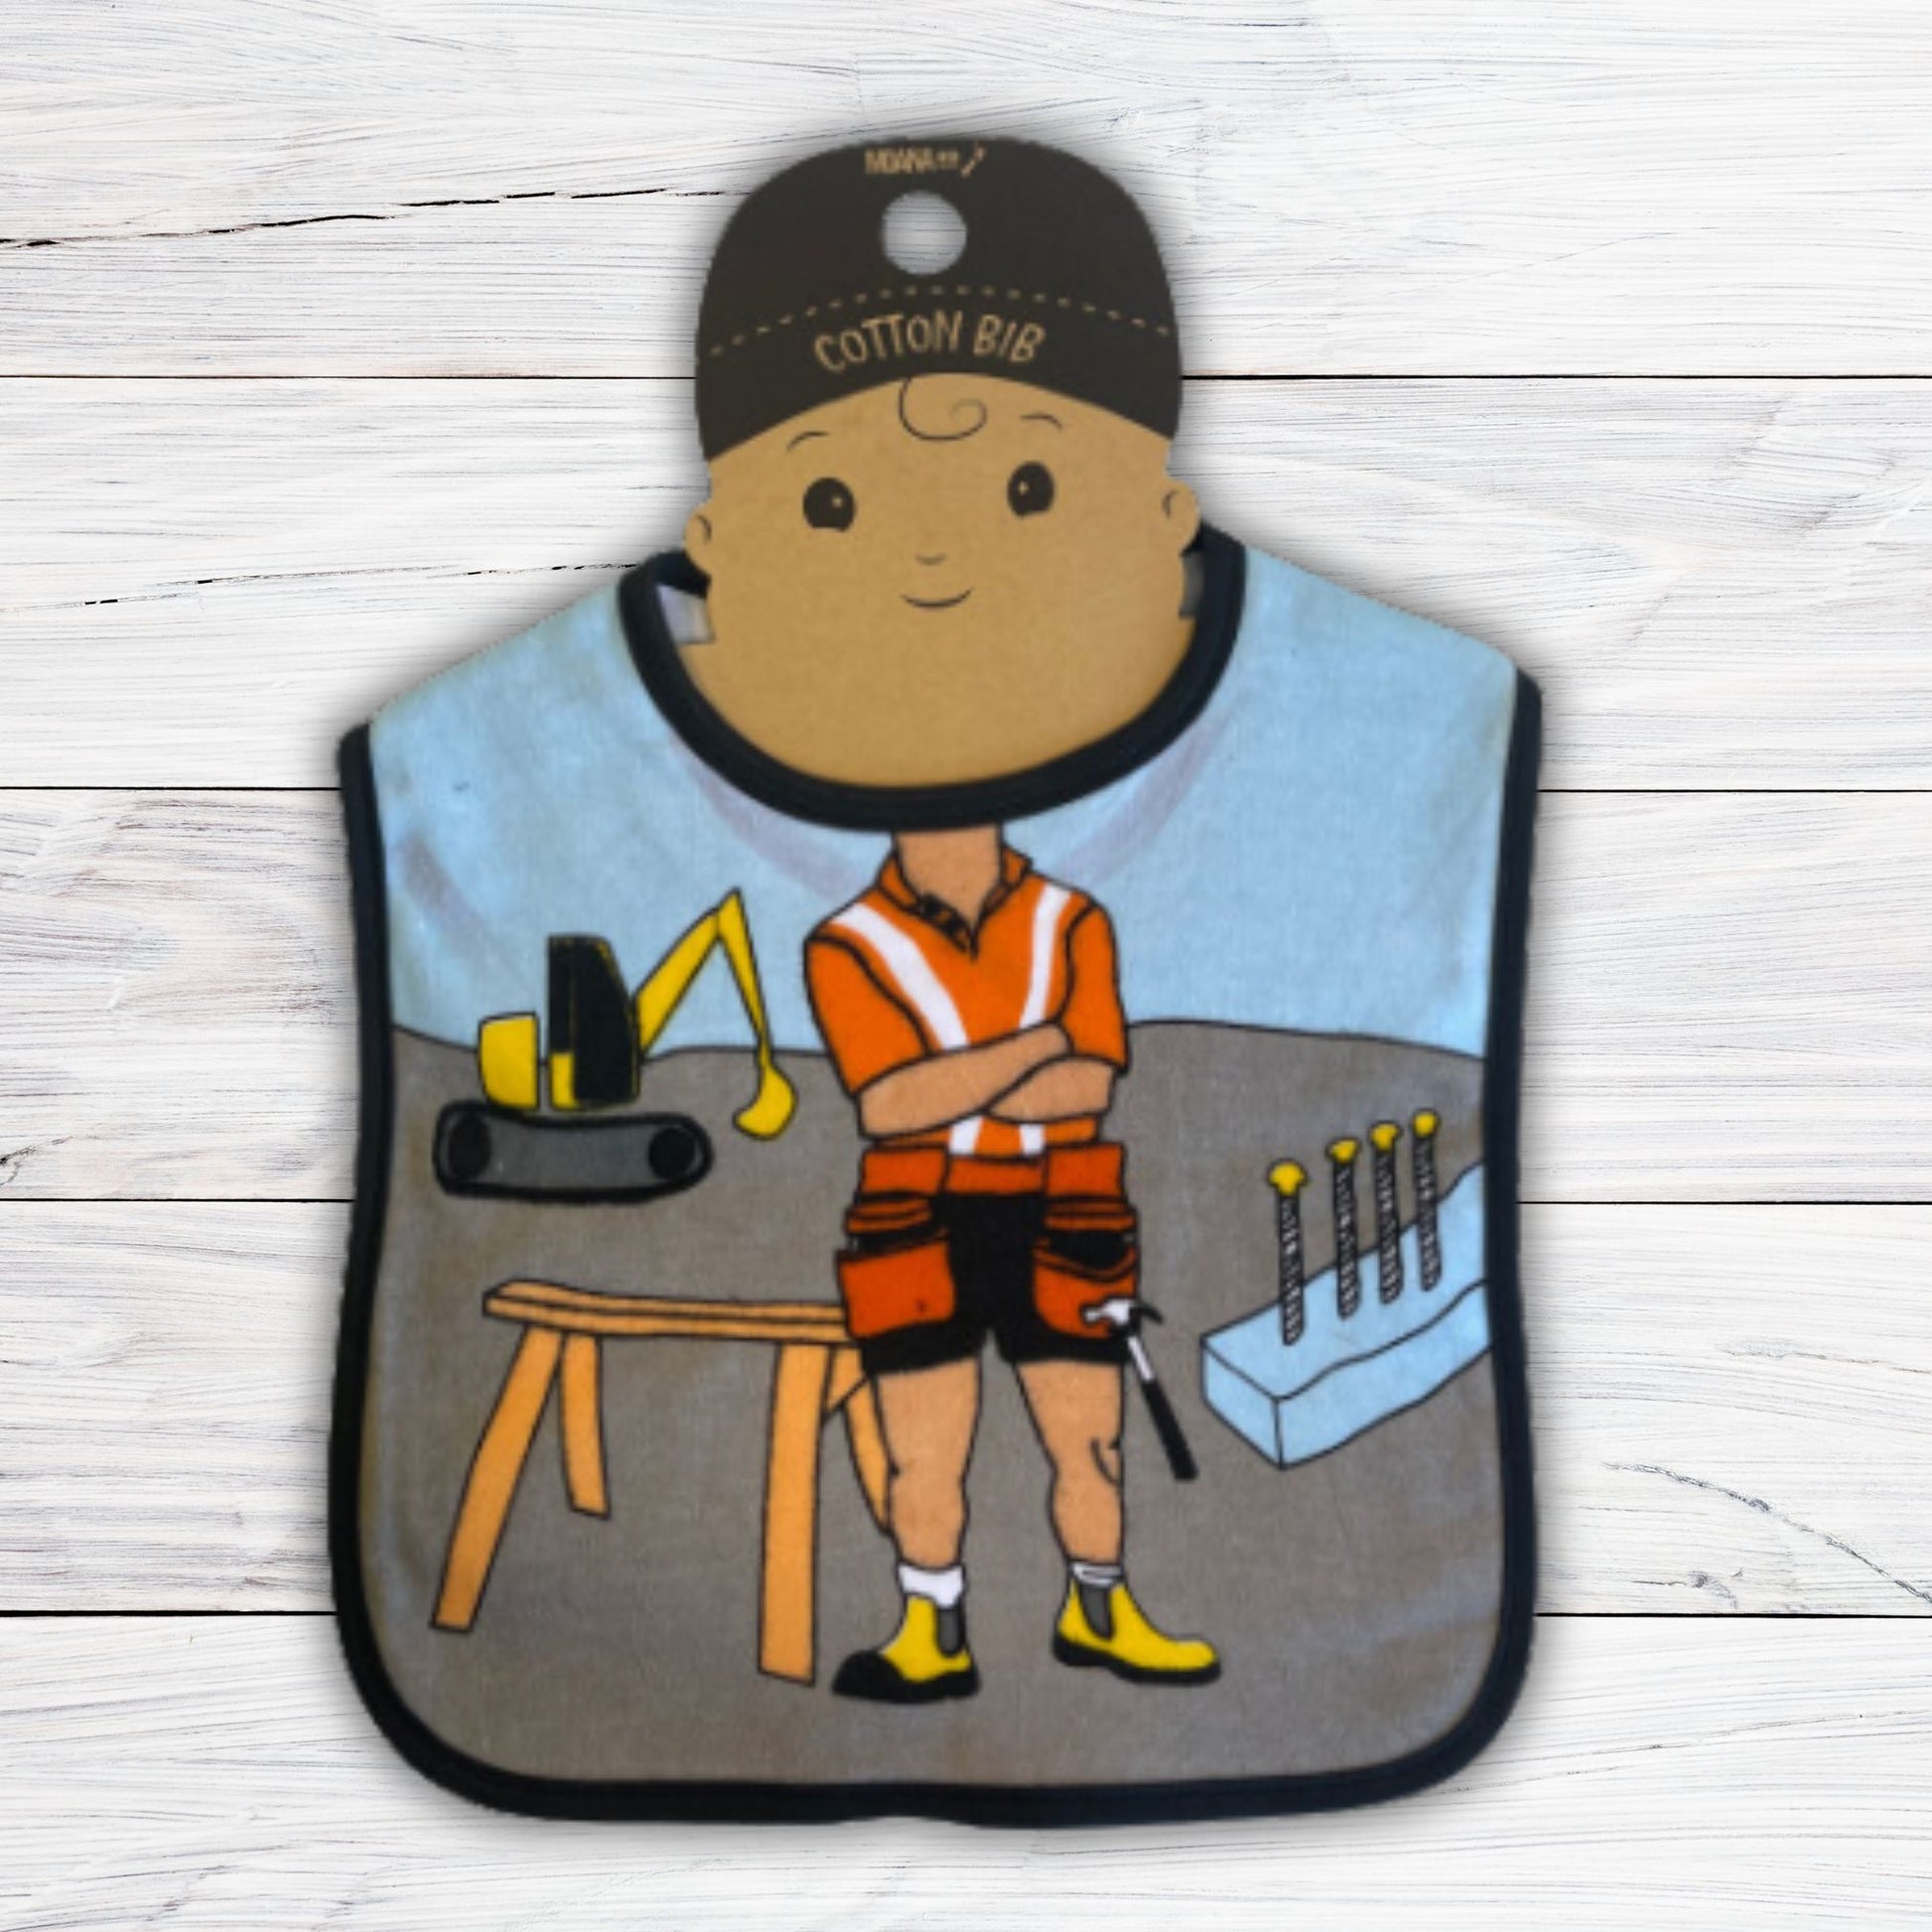 Baby bib with a construction scene and a builders body.